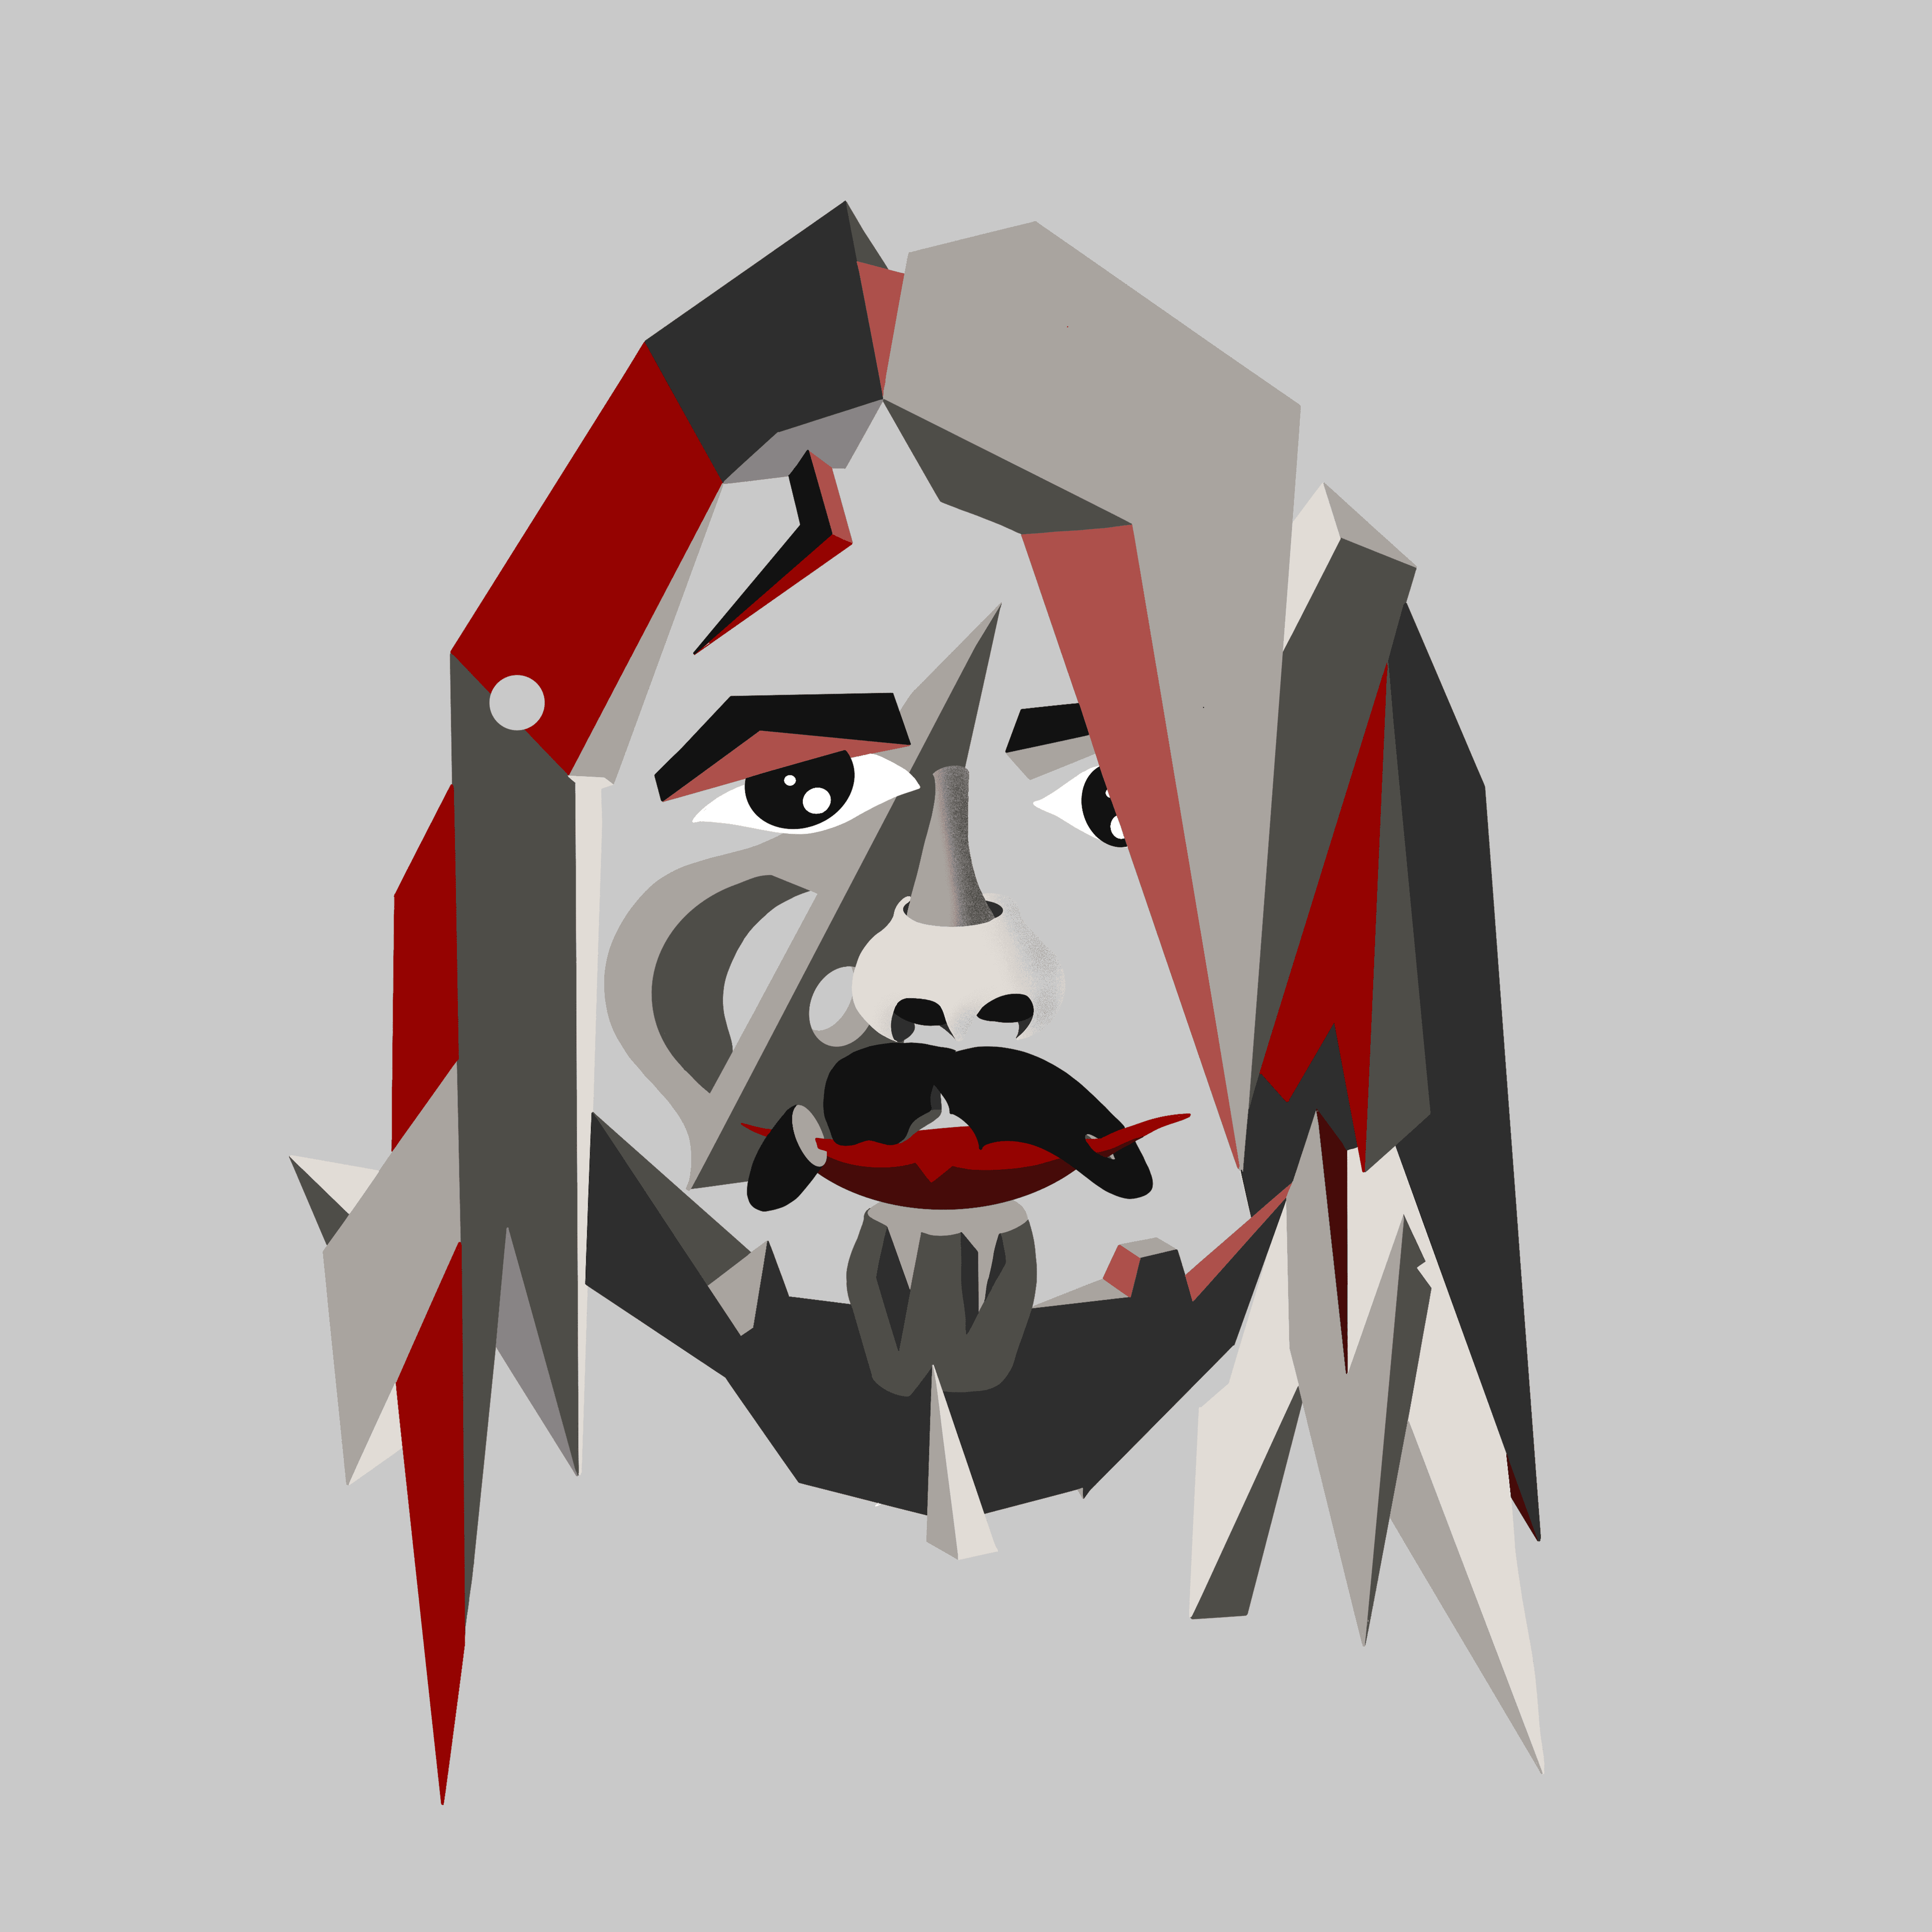 GROHL